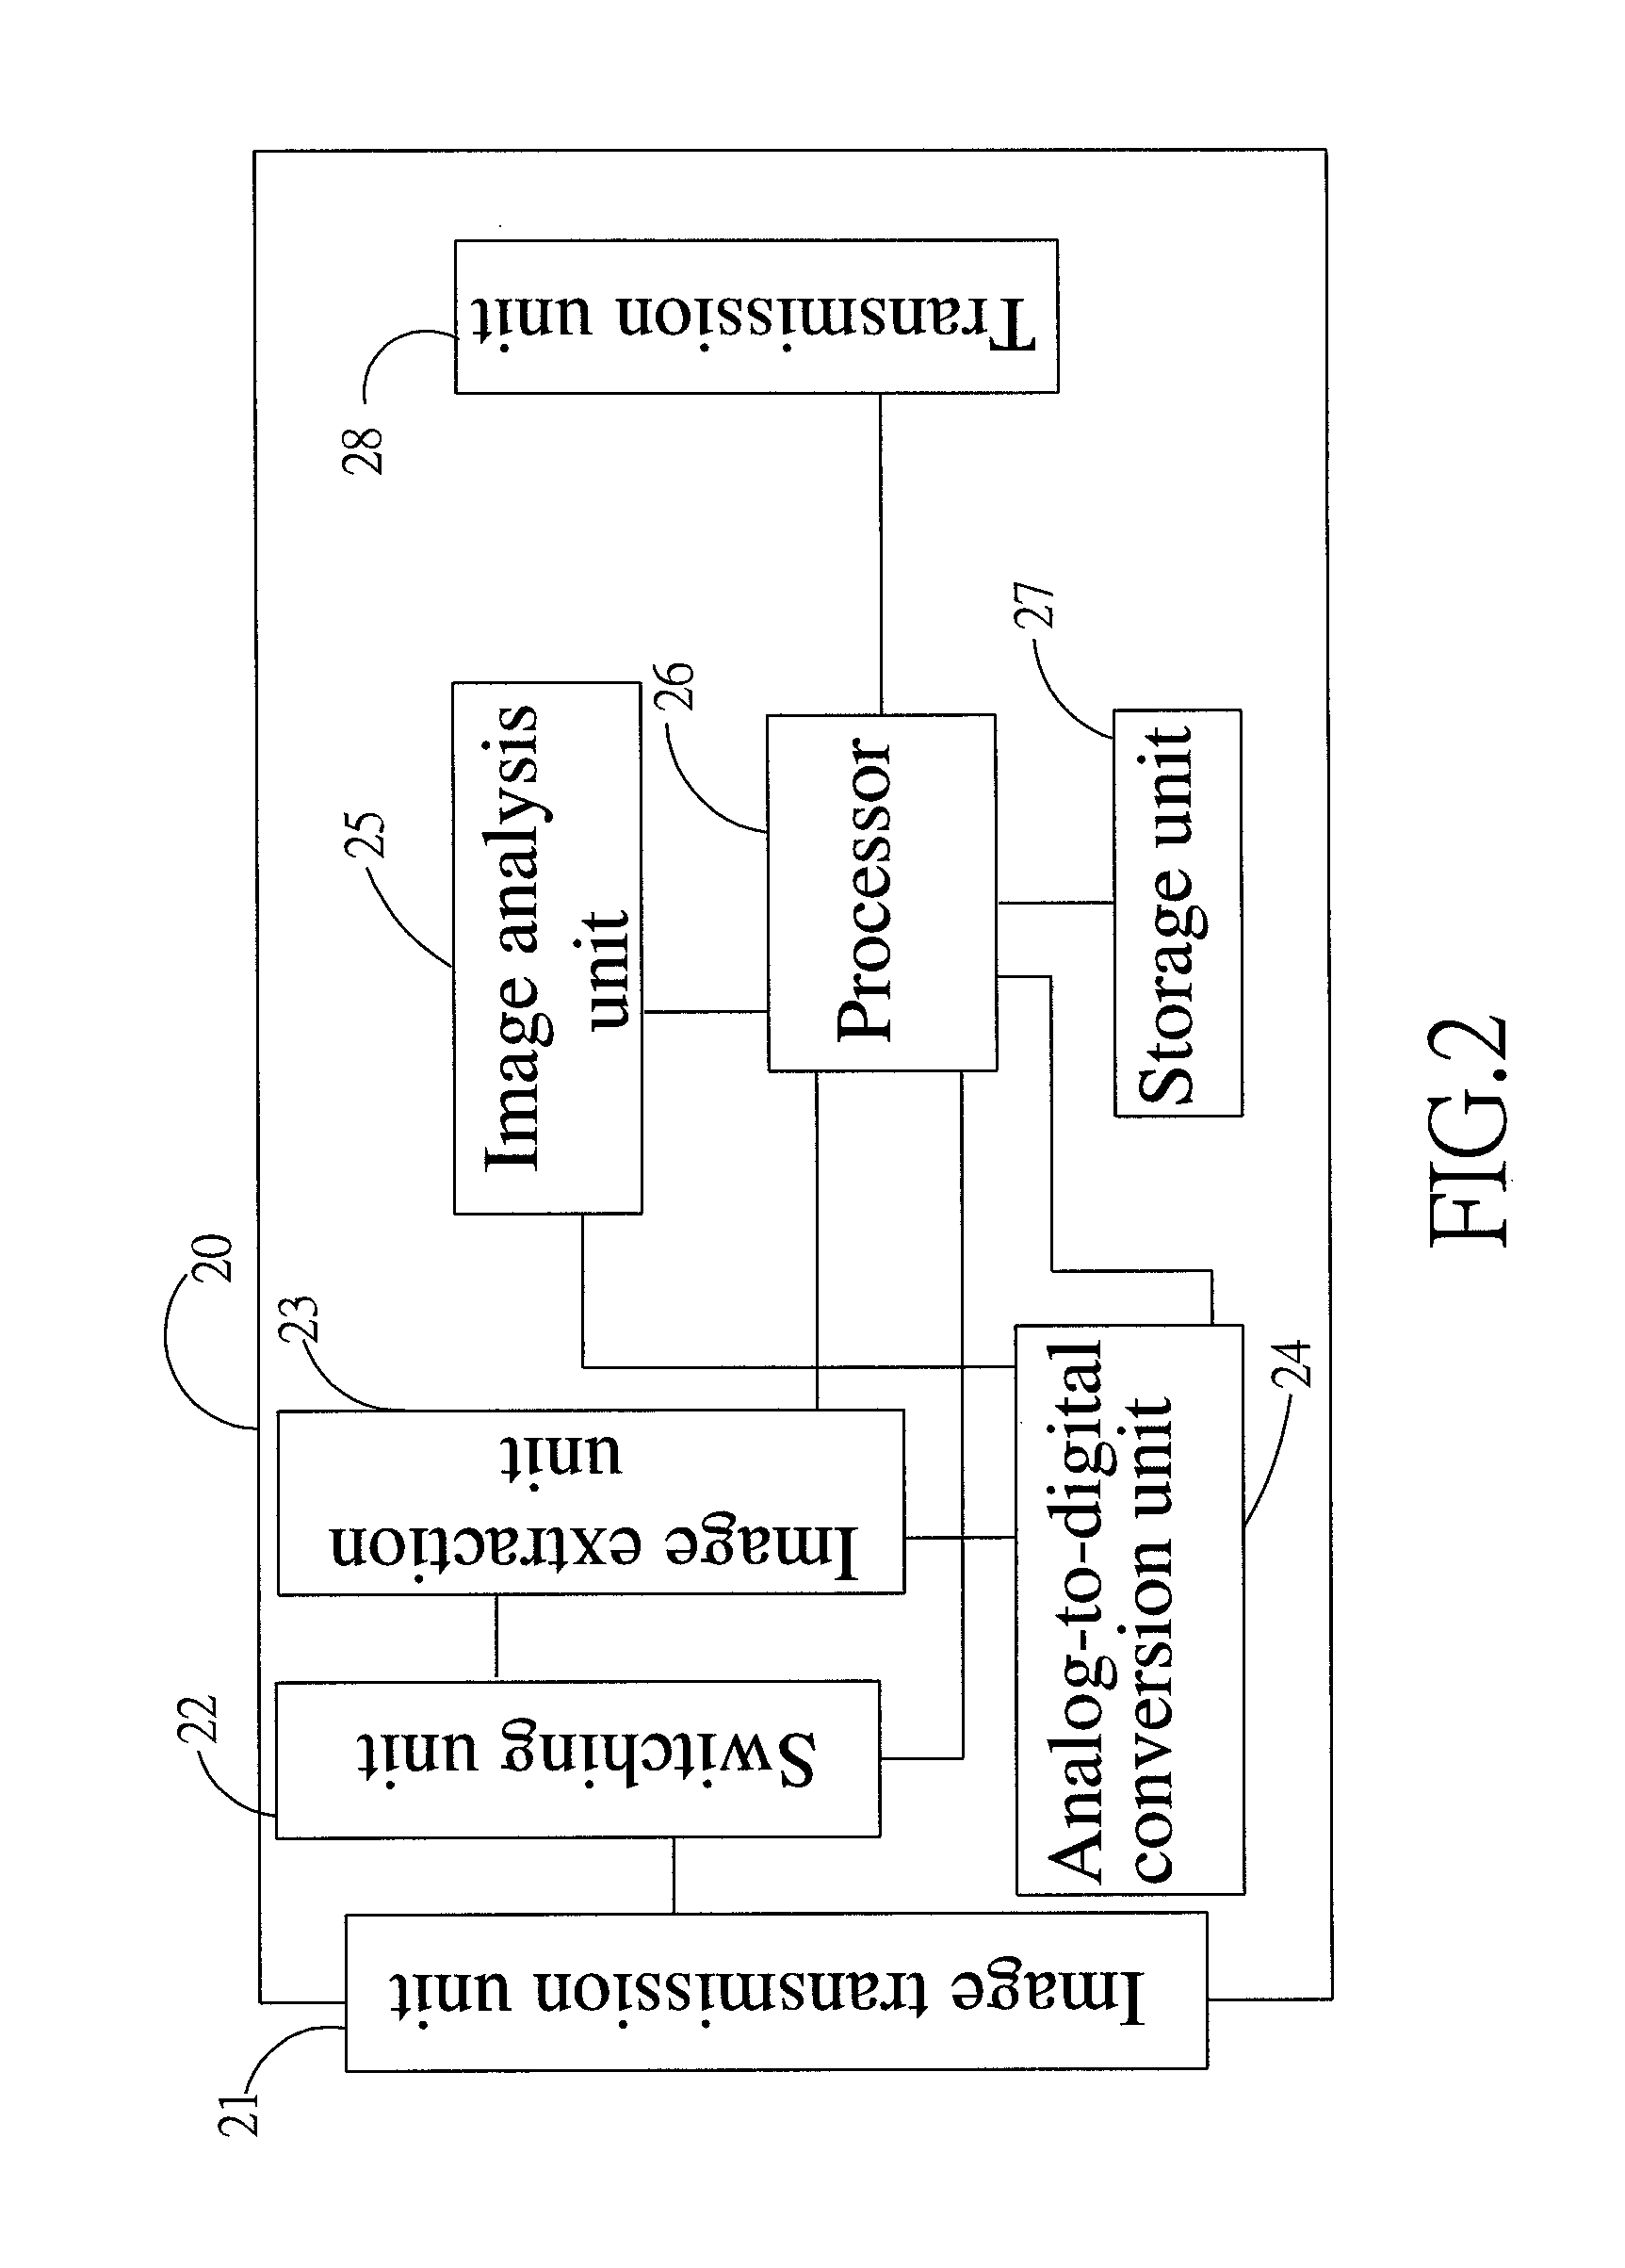 Multi-lens monitoring system for bed elevation around a pier